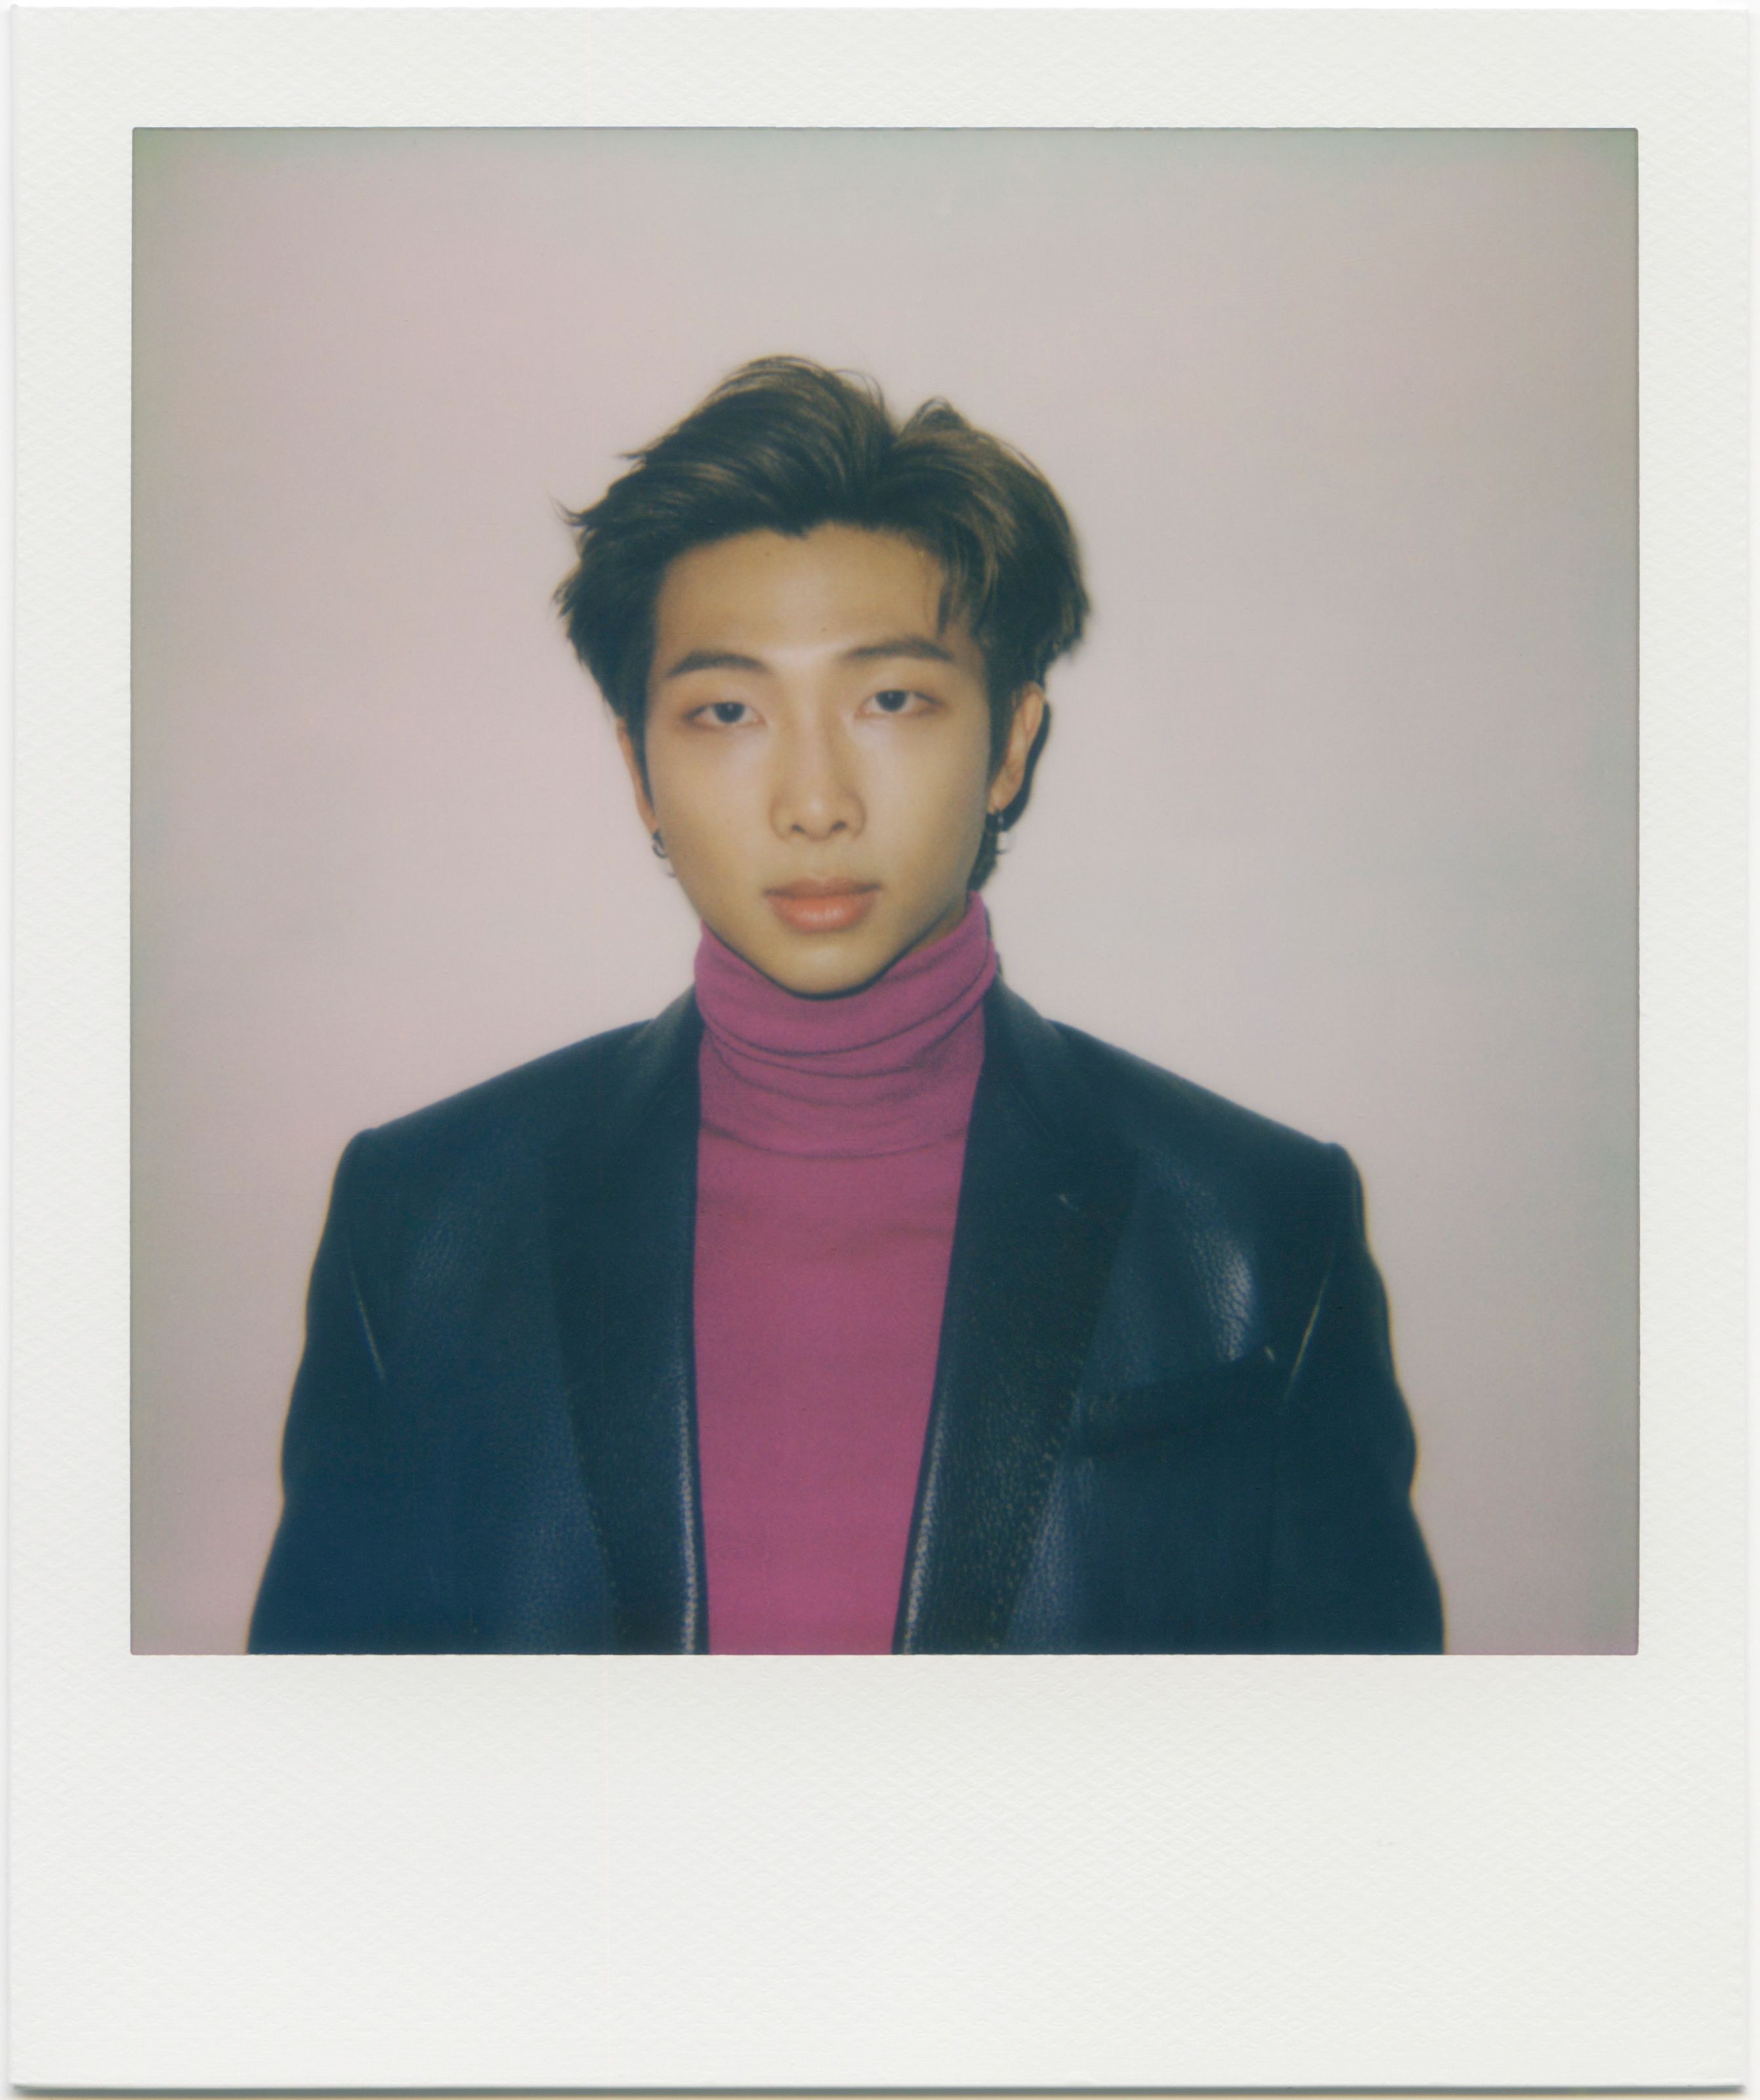 Esquire's BTS Cover: See The Behind The Scenes Polaroid Photo